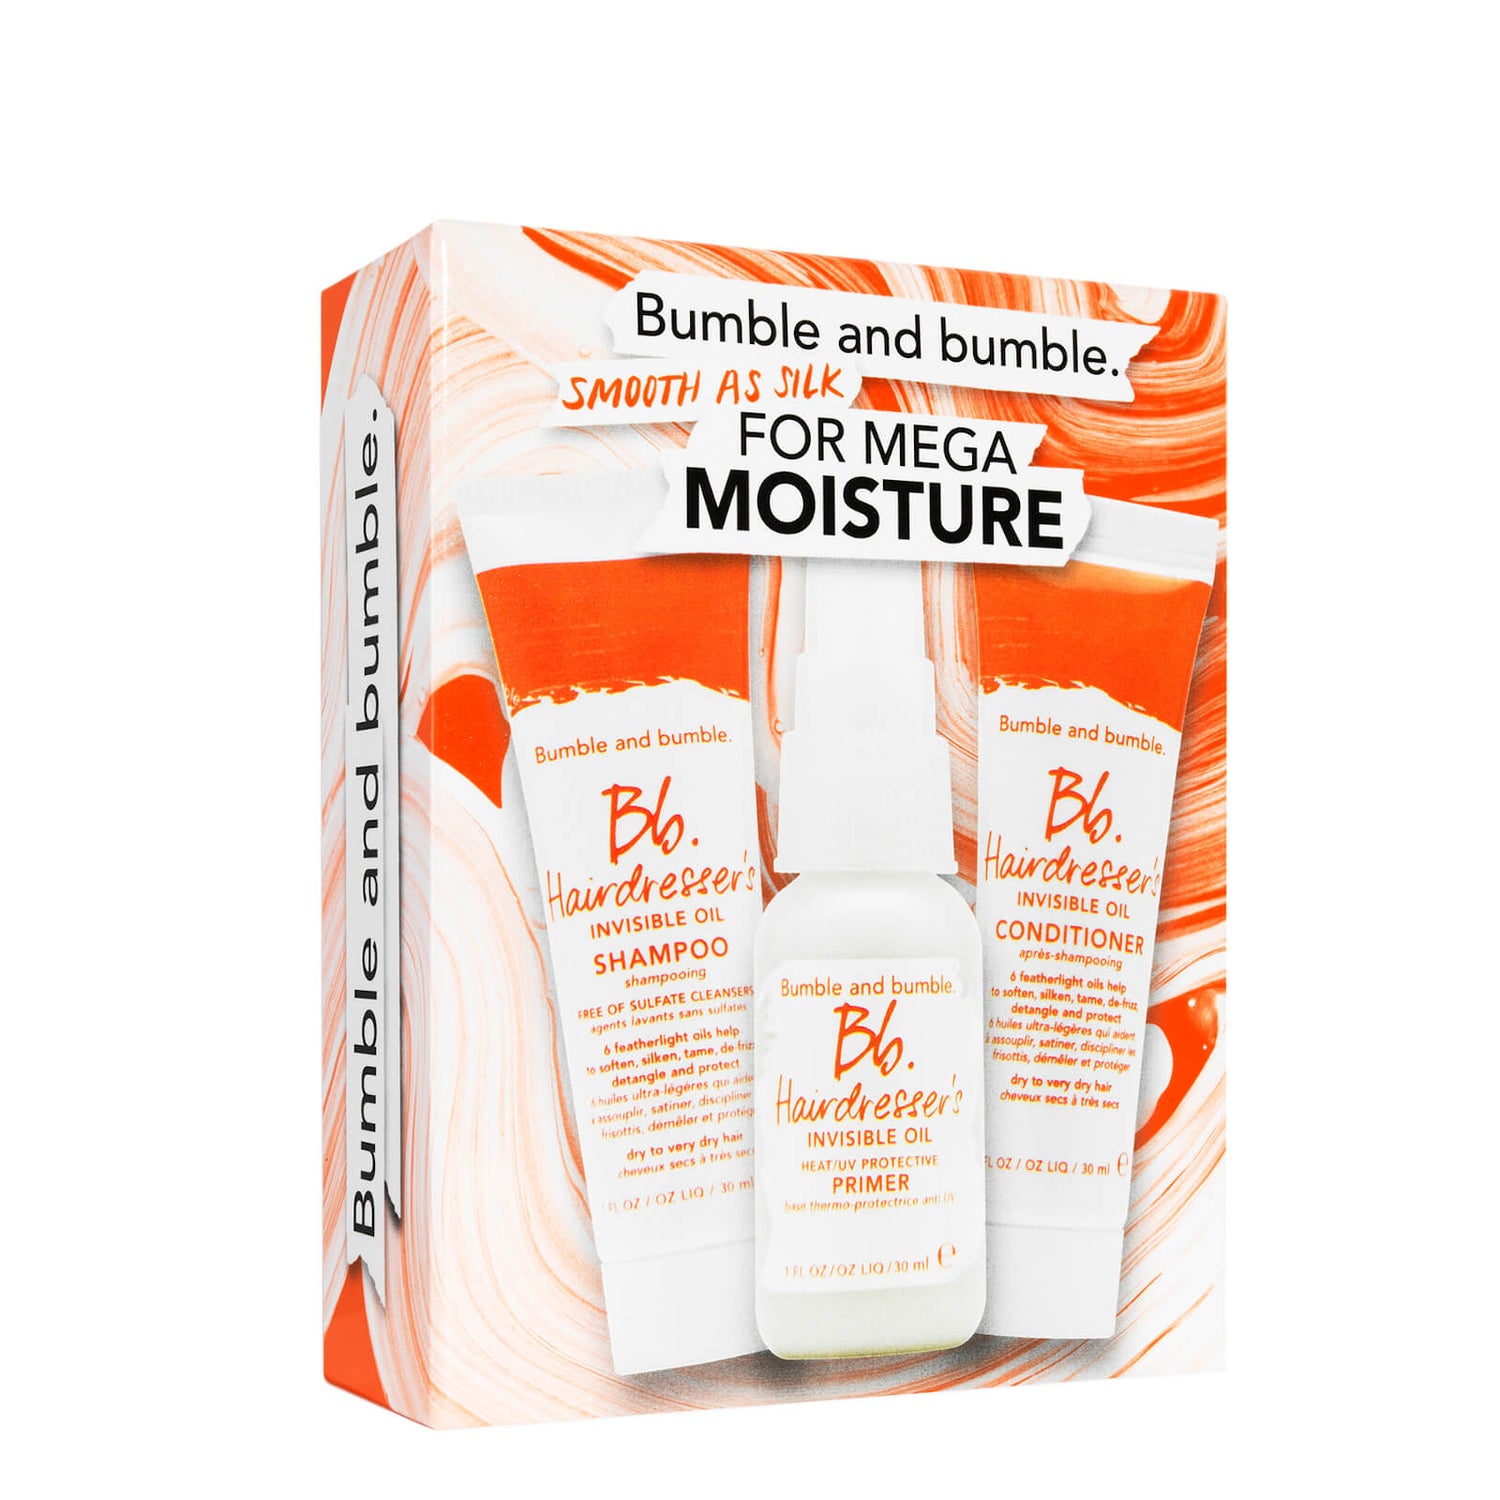 Bumble and bumble Hairdresser's Invisible Oil Trial Kit